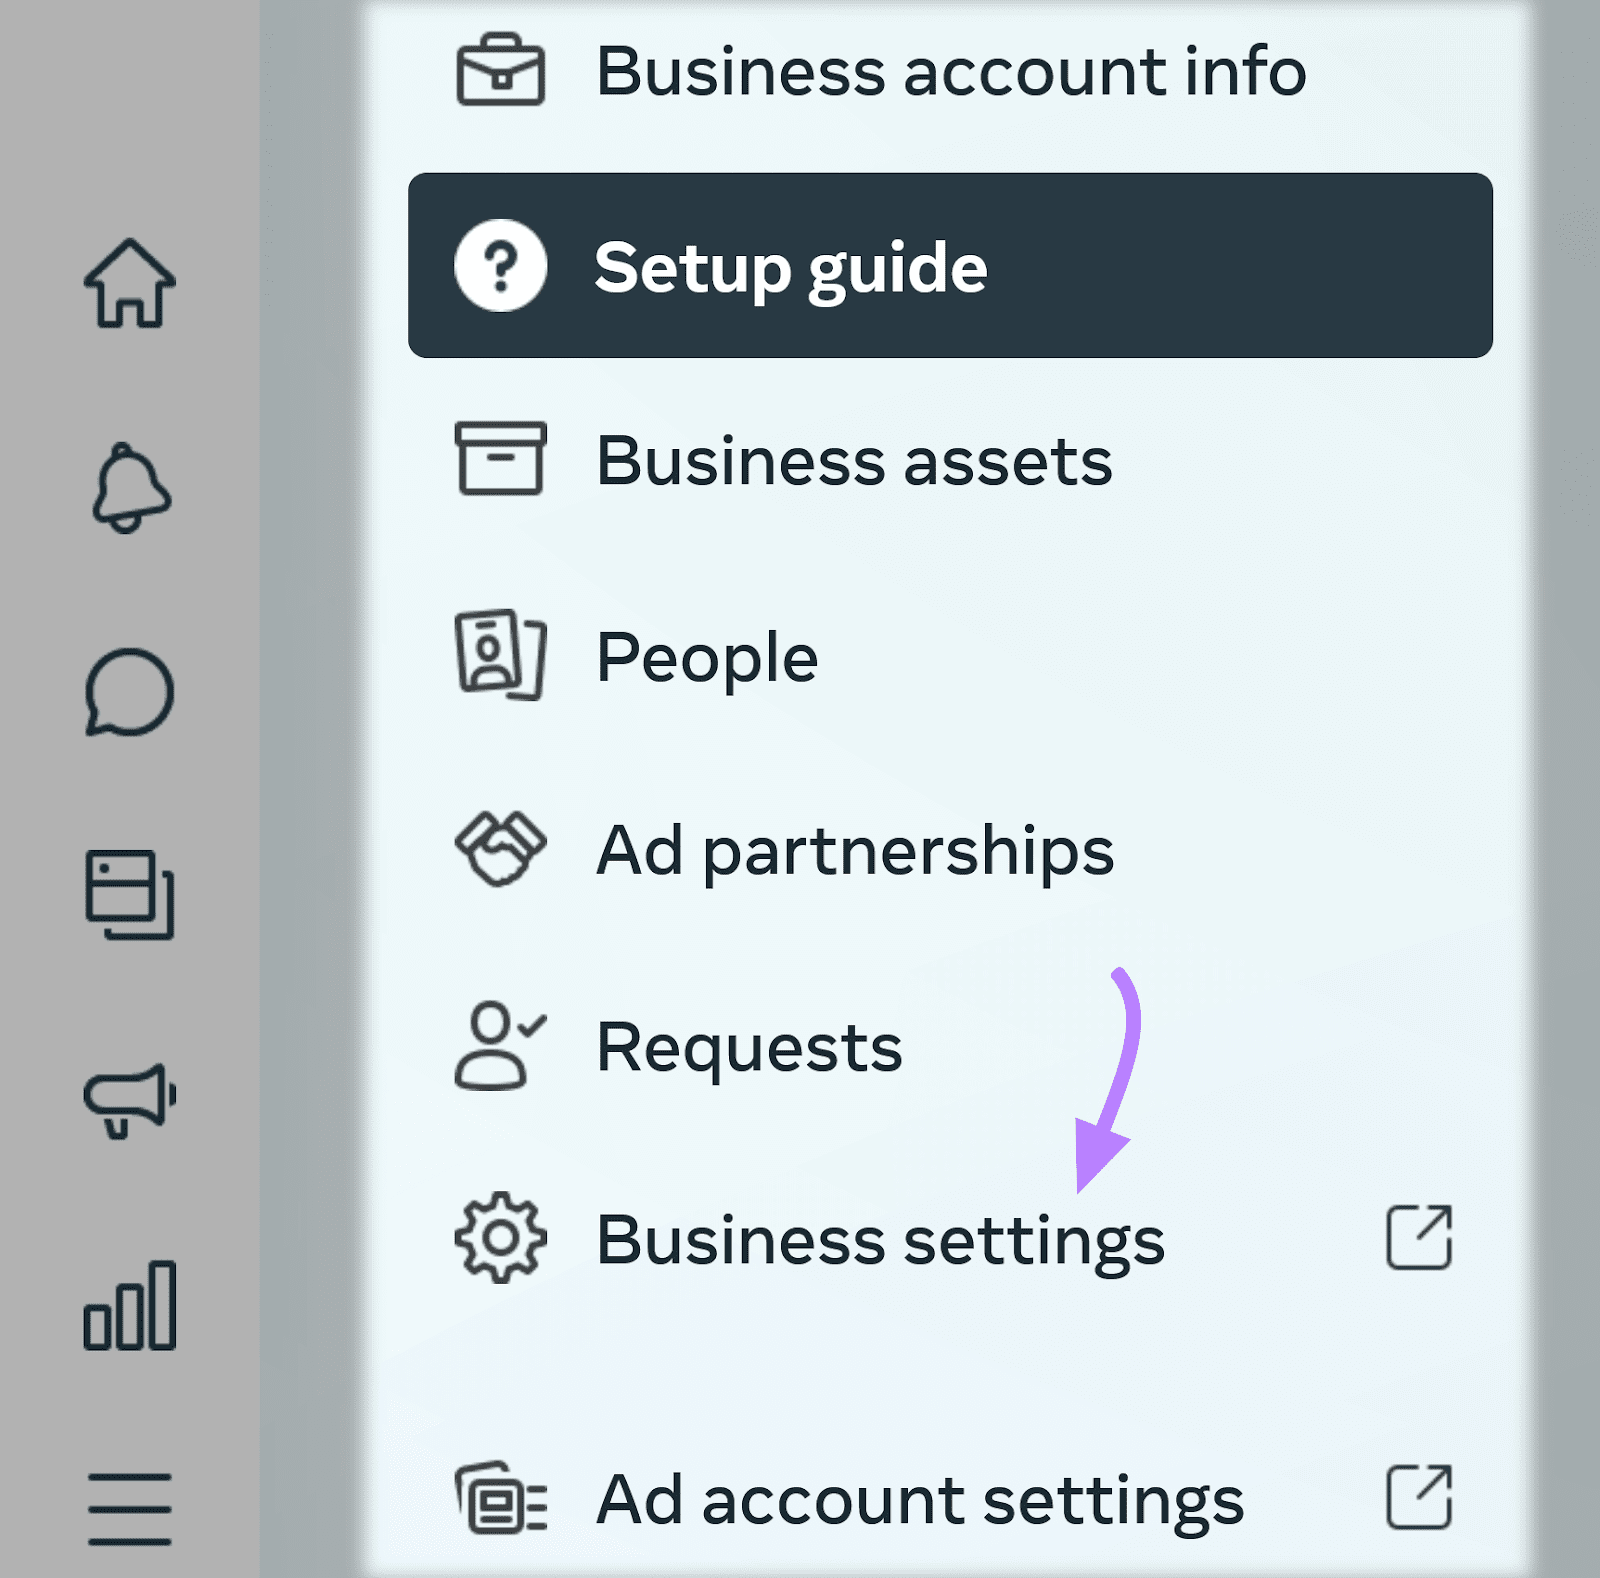 “Business Settings” option selected from the menu